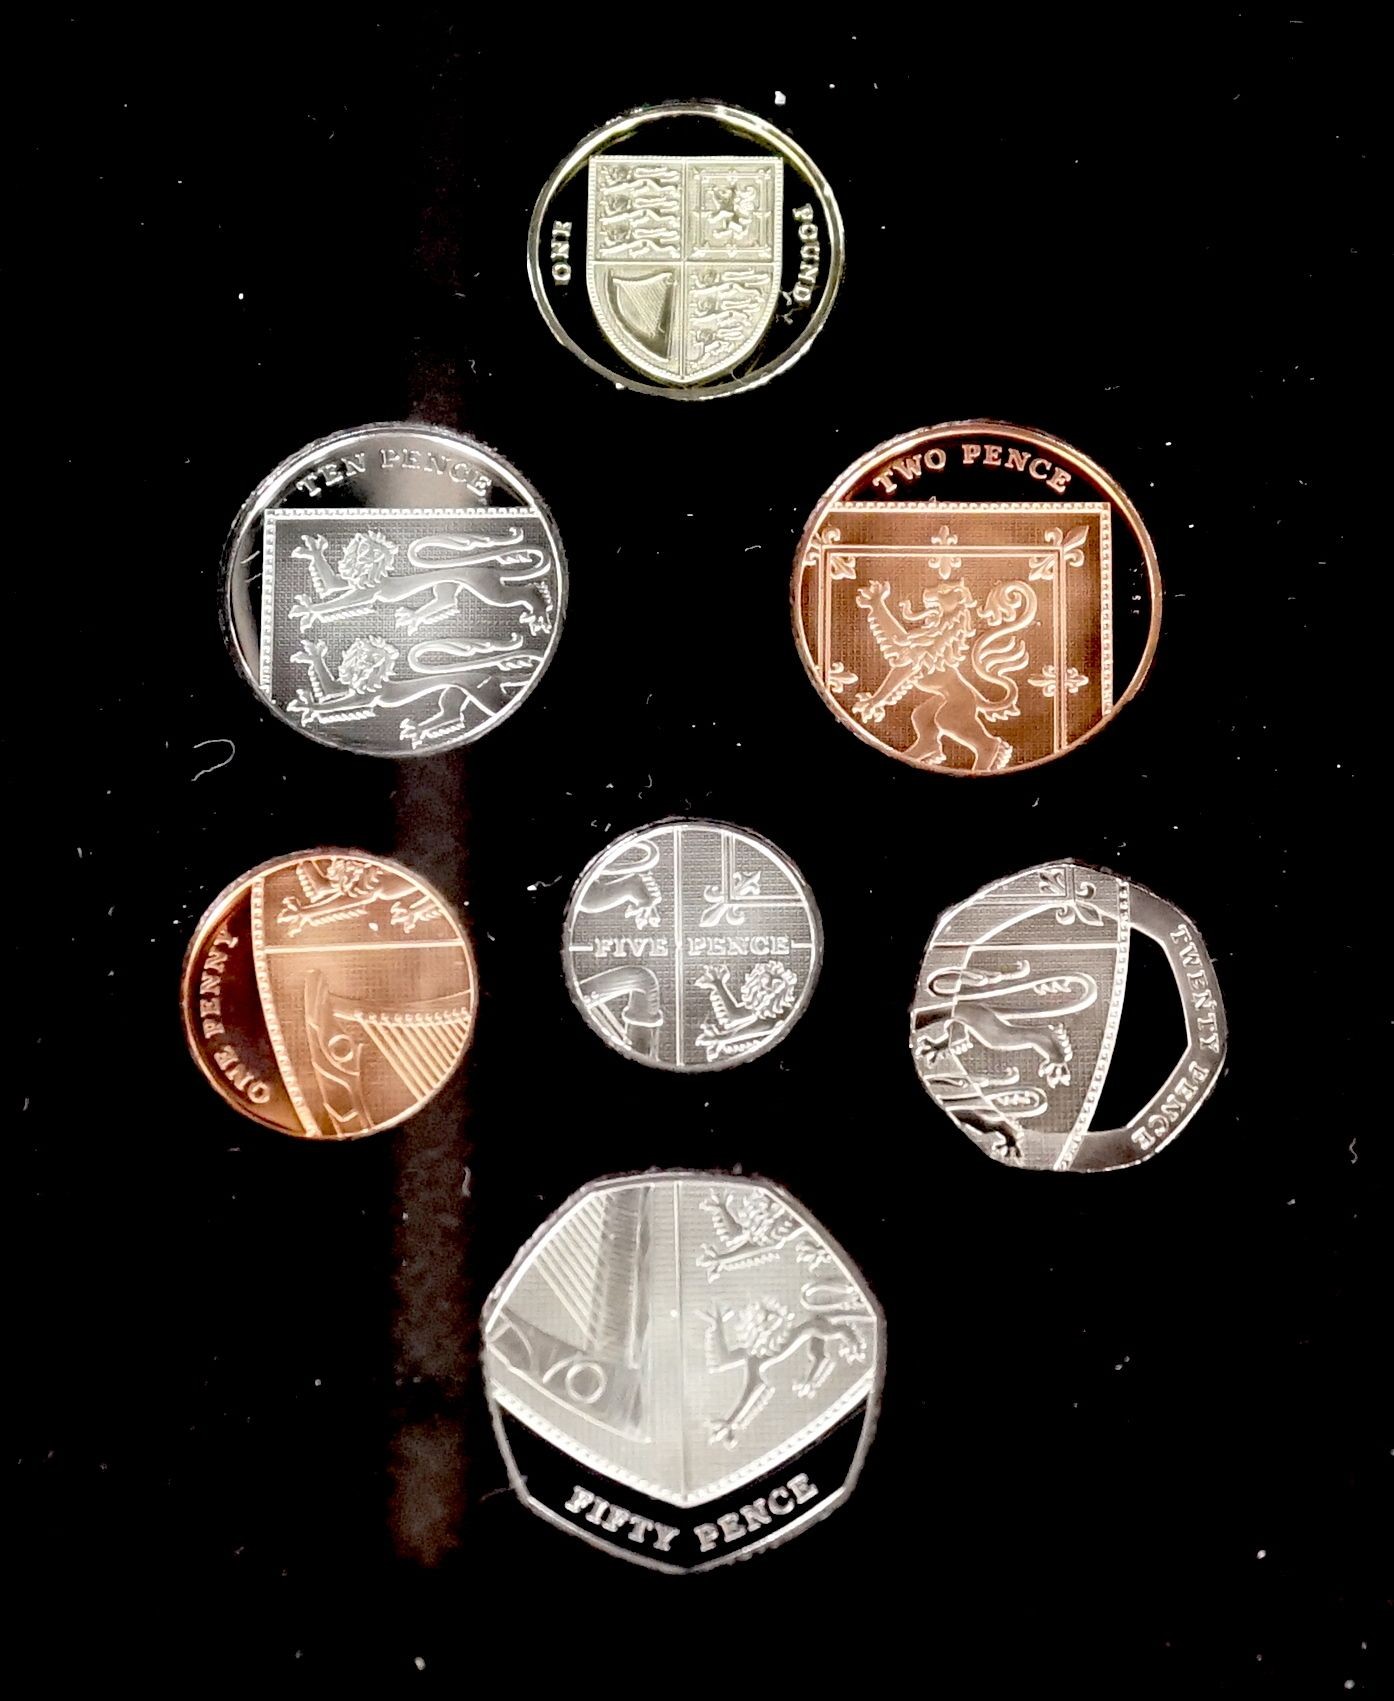 Cased Royal Mint proof coin sets – UK 1996 Silver Wedding Anniversary silver coin collection, 2012 year set, 2008 Royal Shield of Arms, together with a Channel Islands Diana Crown set 2002